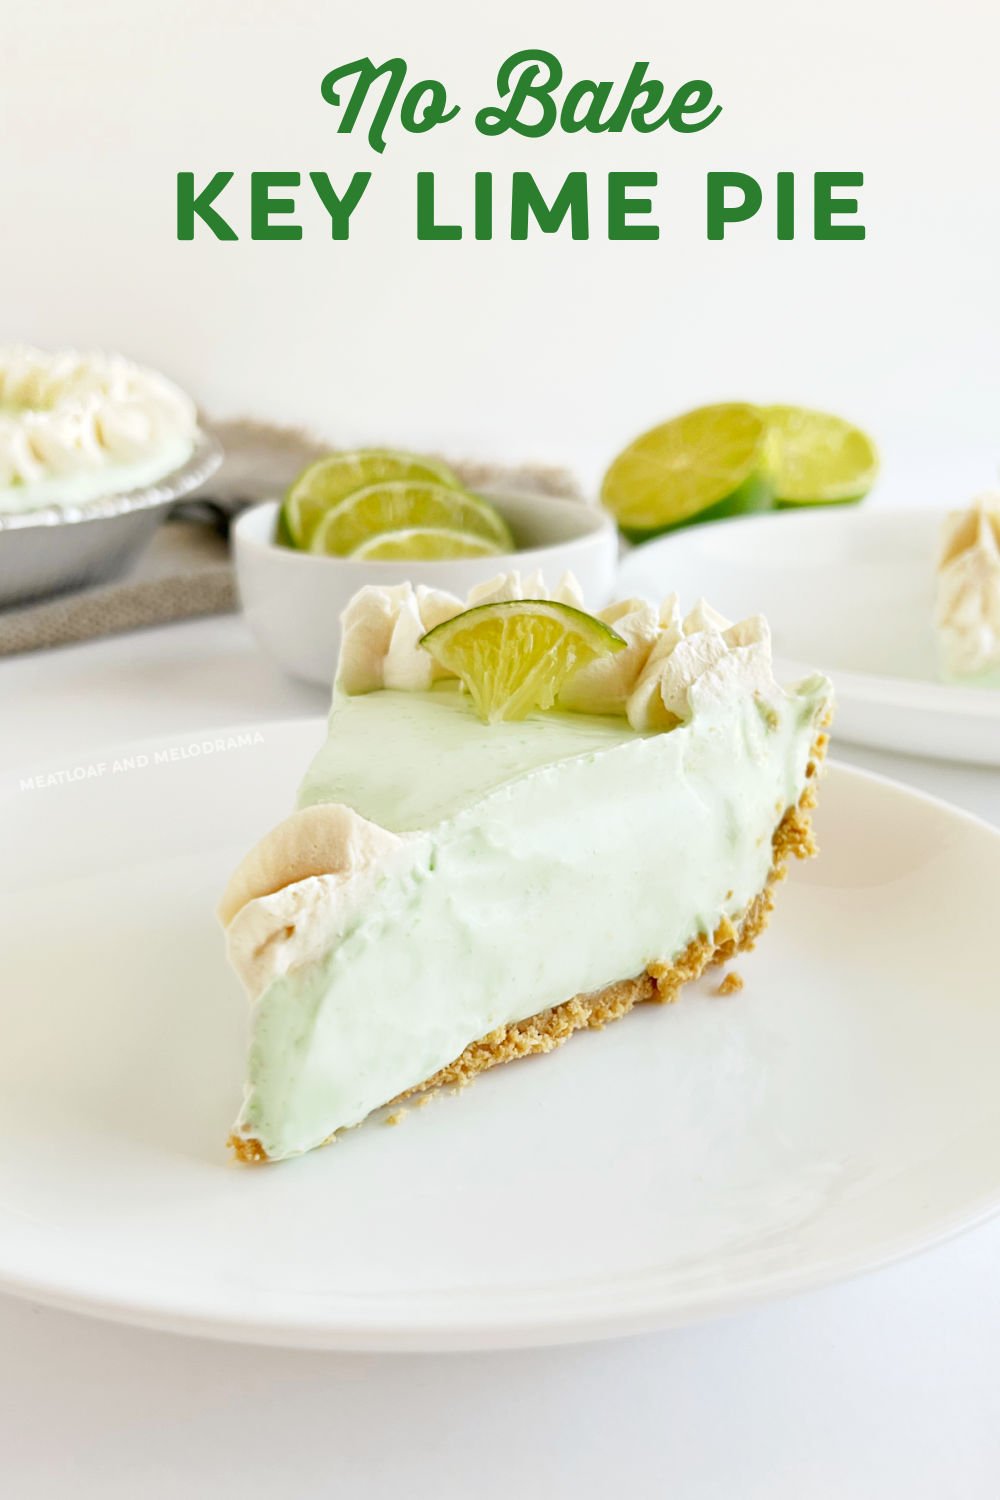 Our delicious No Bake Key Lime Pie with Cool Whip, lime Jello and Greek yogurt in a graham cracker crust is an easy pie recipe and the perfect summer dessert. This no bake pie is sure to be a family favorite! via @meamel